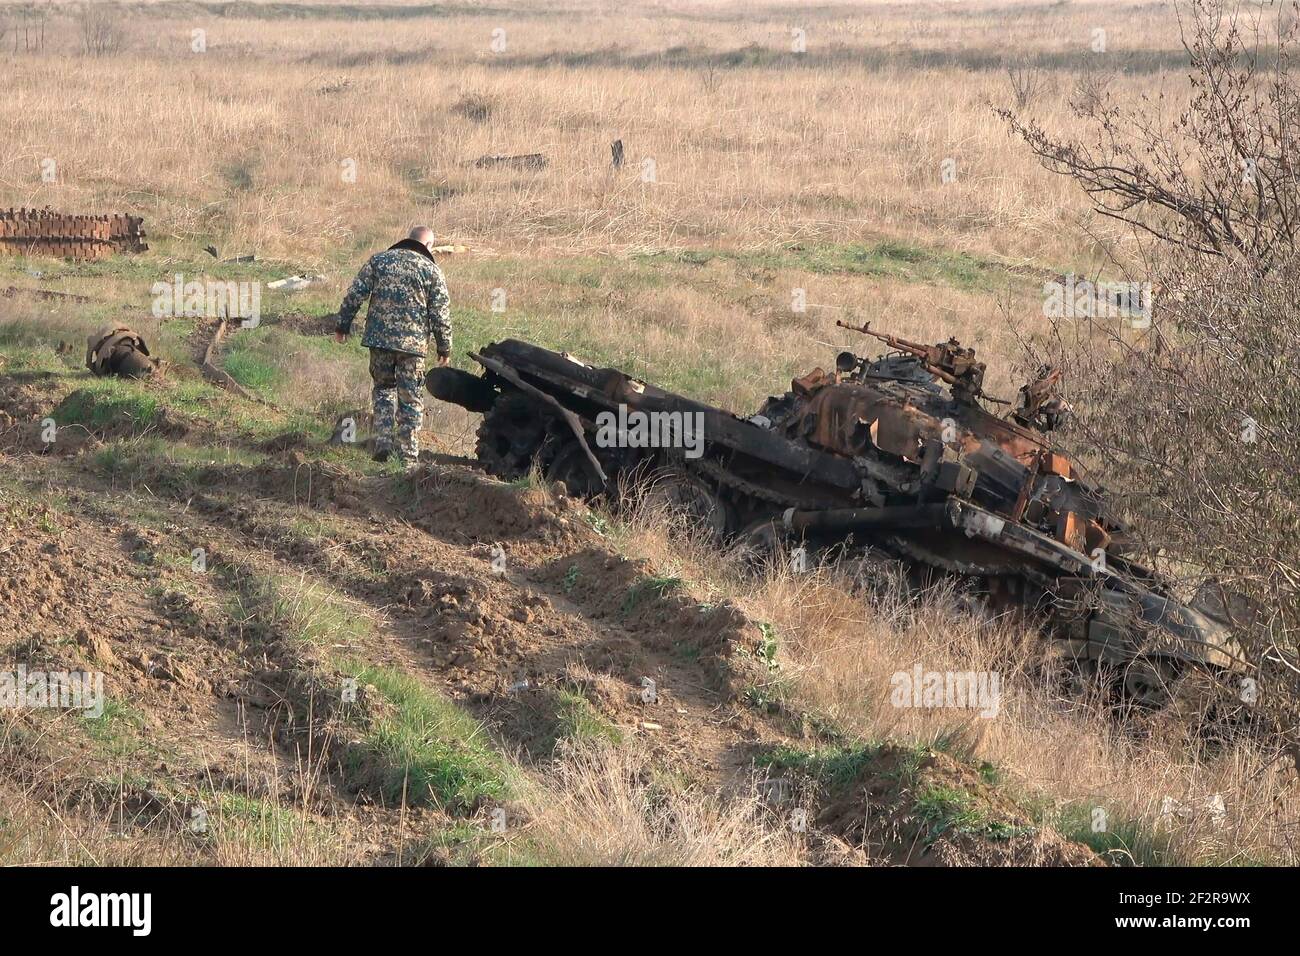 JABRAYIL, AZERBAIJAN - DECEMBER 15: A member of the Russian peacekeeping troops force examines a destroyed Armenian T-72 tank for remains of Armenian fighters killed in the conflict over the disputed region of Nagorno-Karabakh on December 15 2020 in the Jabrayil Rayon of Azerbaijan. Heavy clashes erupted over Nagorno-Karabakh in late September during which more than 5,600 people, including civilians, were killed. The sides agreed to a Russia-brokered cease-fire deal that took effect on November 10 Stock Photo